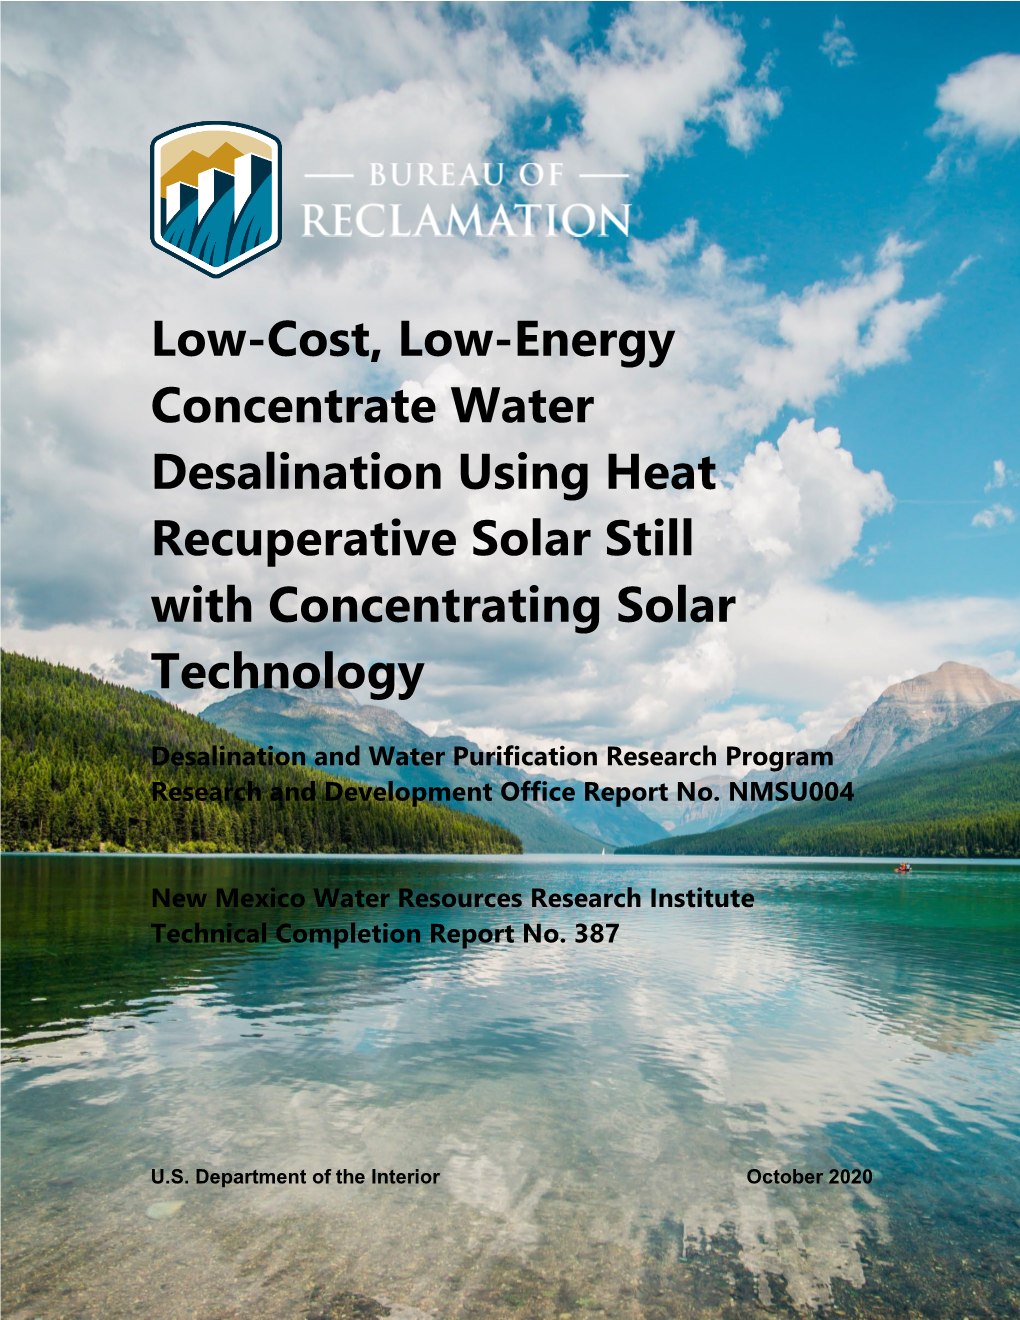 Low-Cost, Low-Energy Concentrate Water Desalination Using Heat Recuperative Solar Still with Concentrating Solar Technology